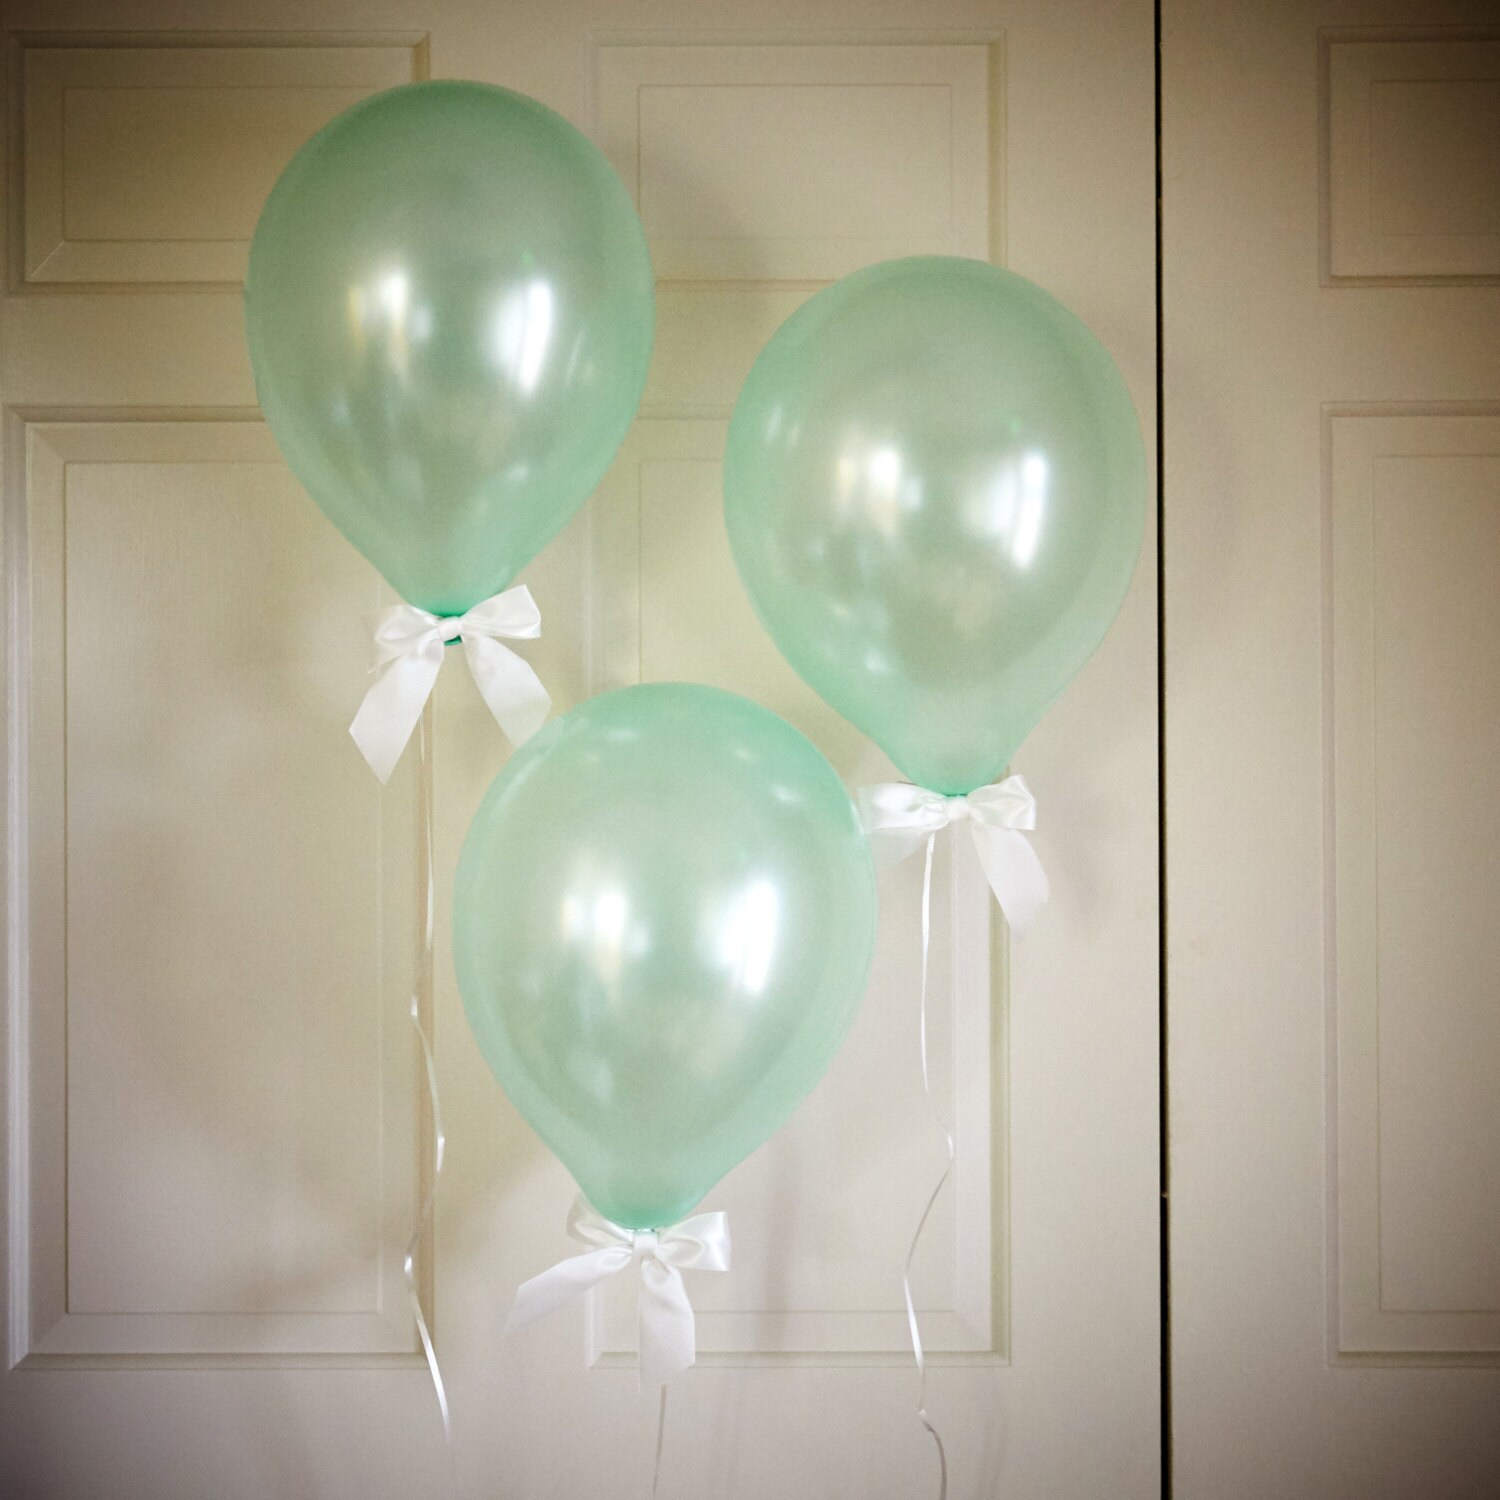 Mint Green Party Decor Balloons with Bows 8CT Curling